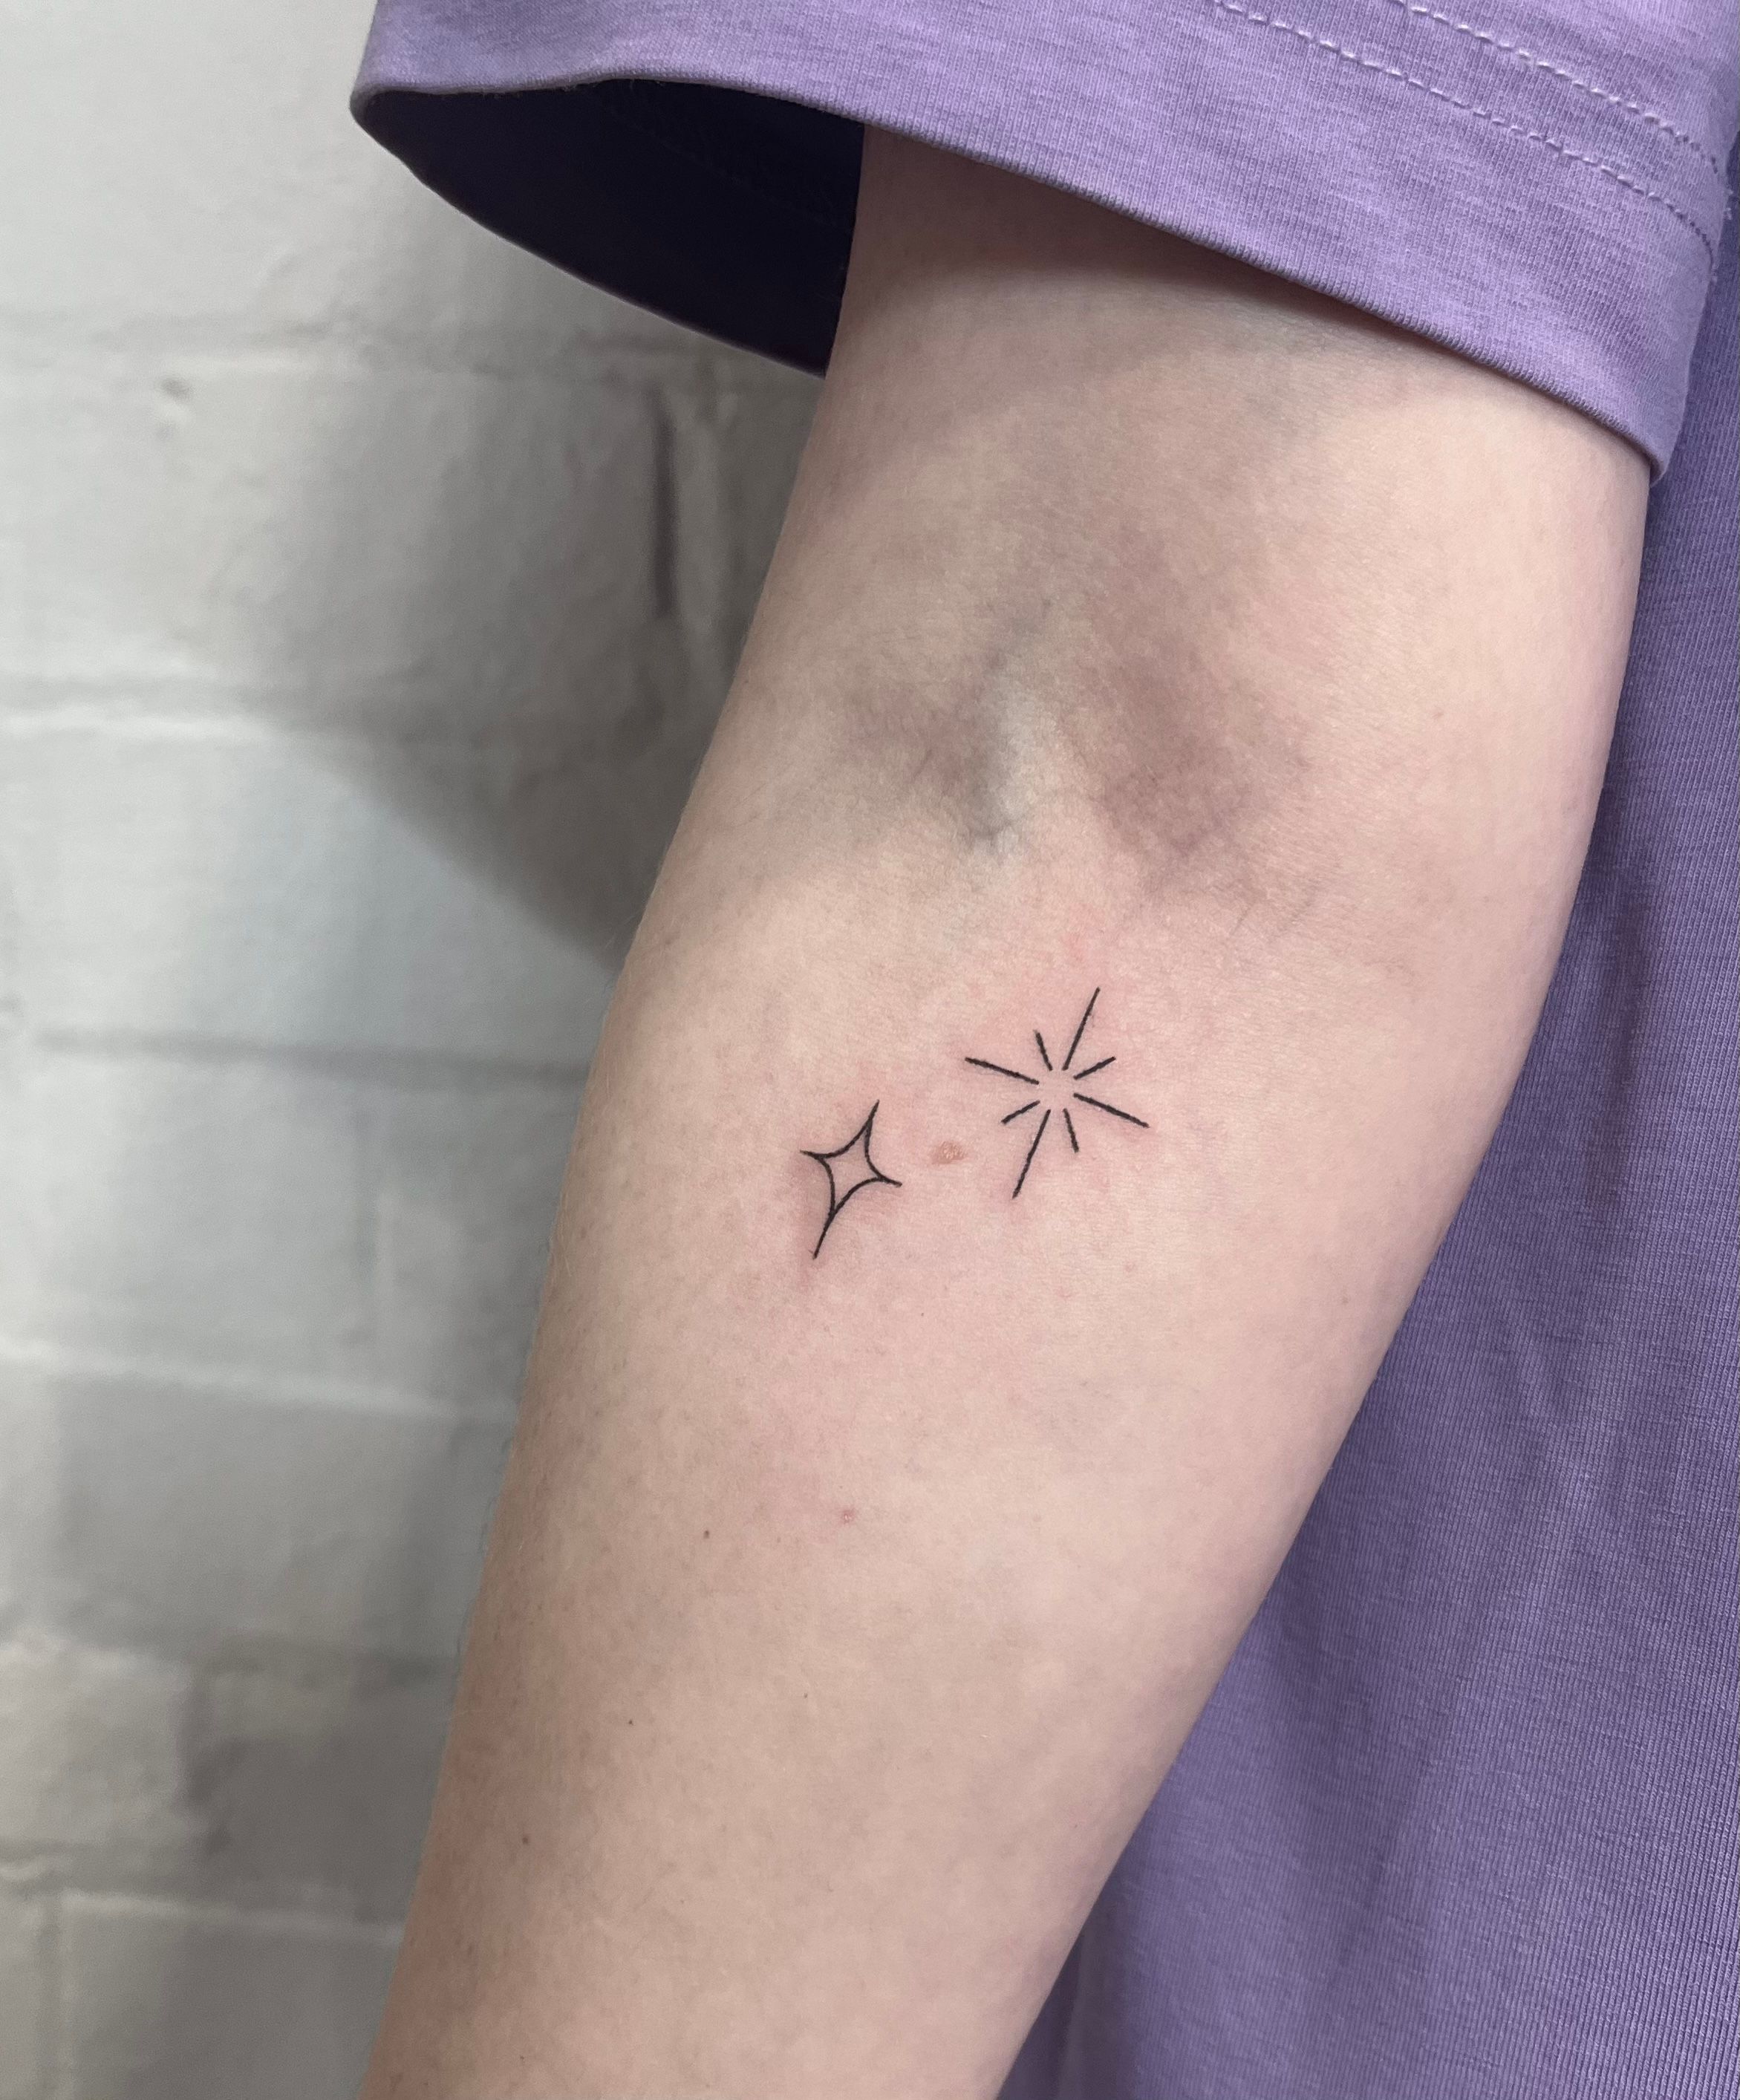 15 Dainty Ankle Tattoos That Will Tempt You To Get Inked